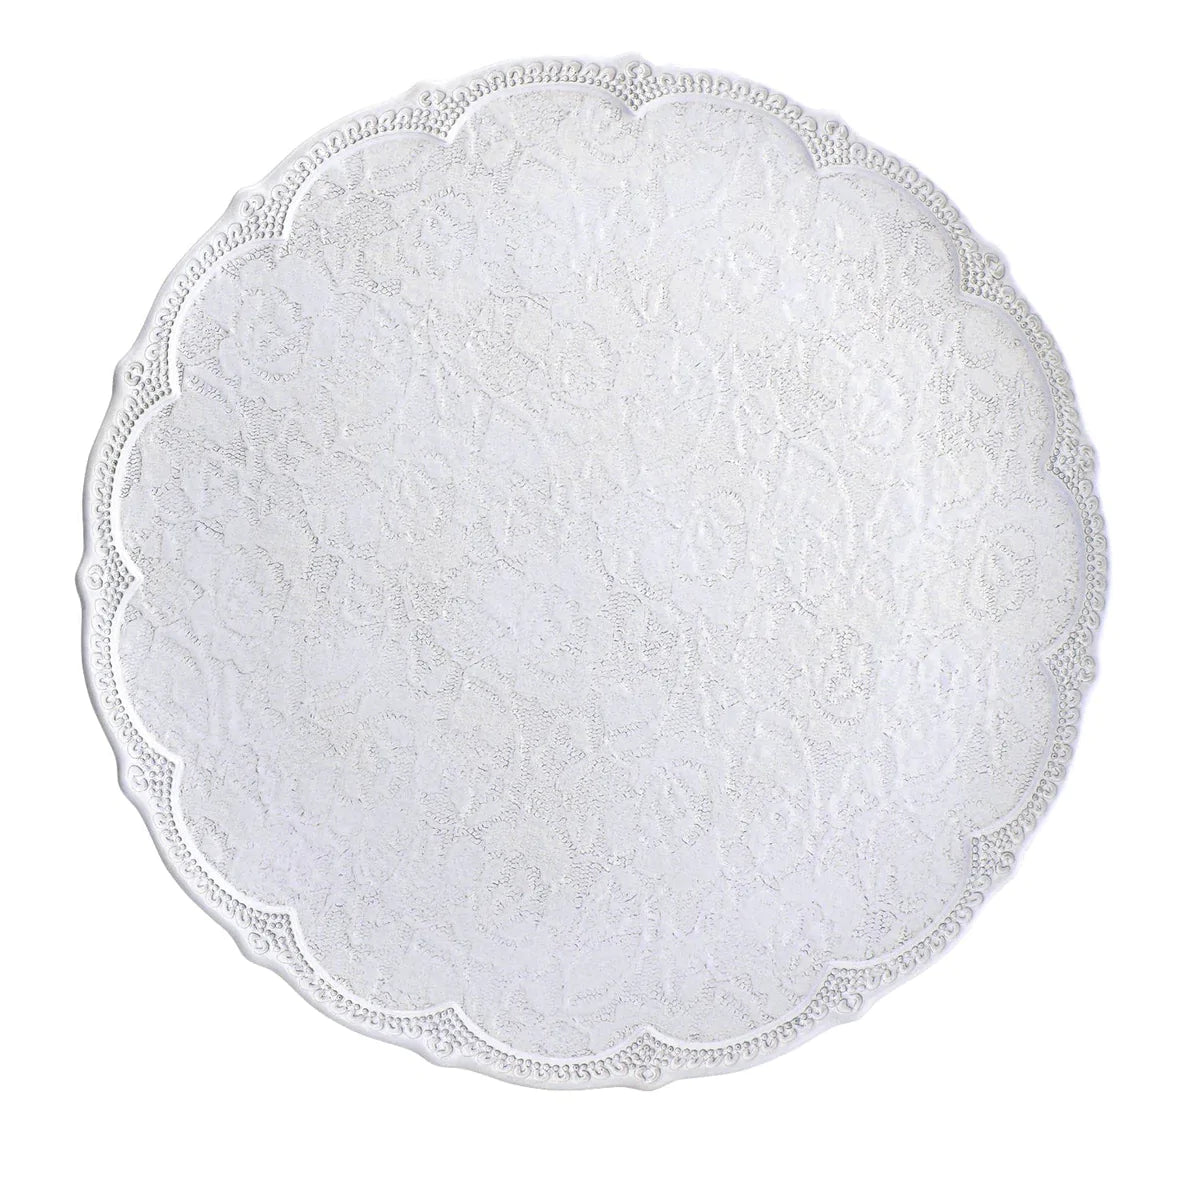 Merletto White Lace Scalloped Charger